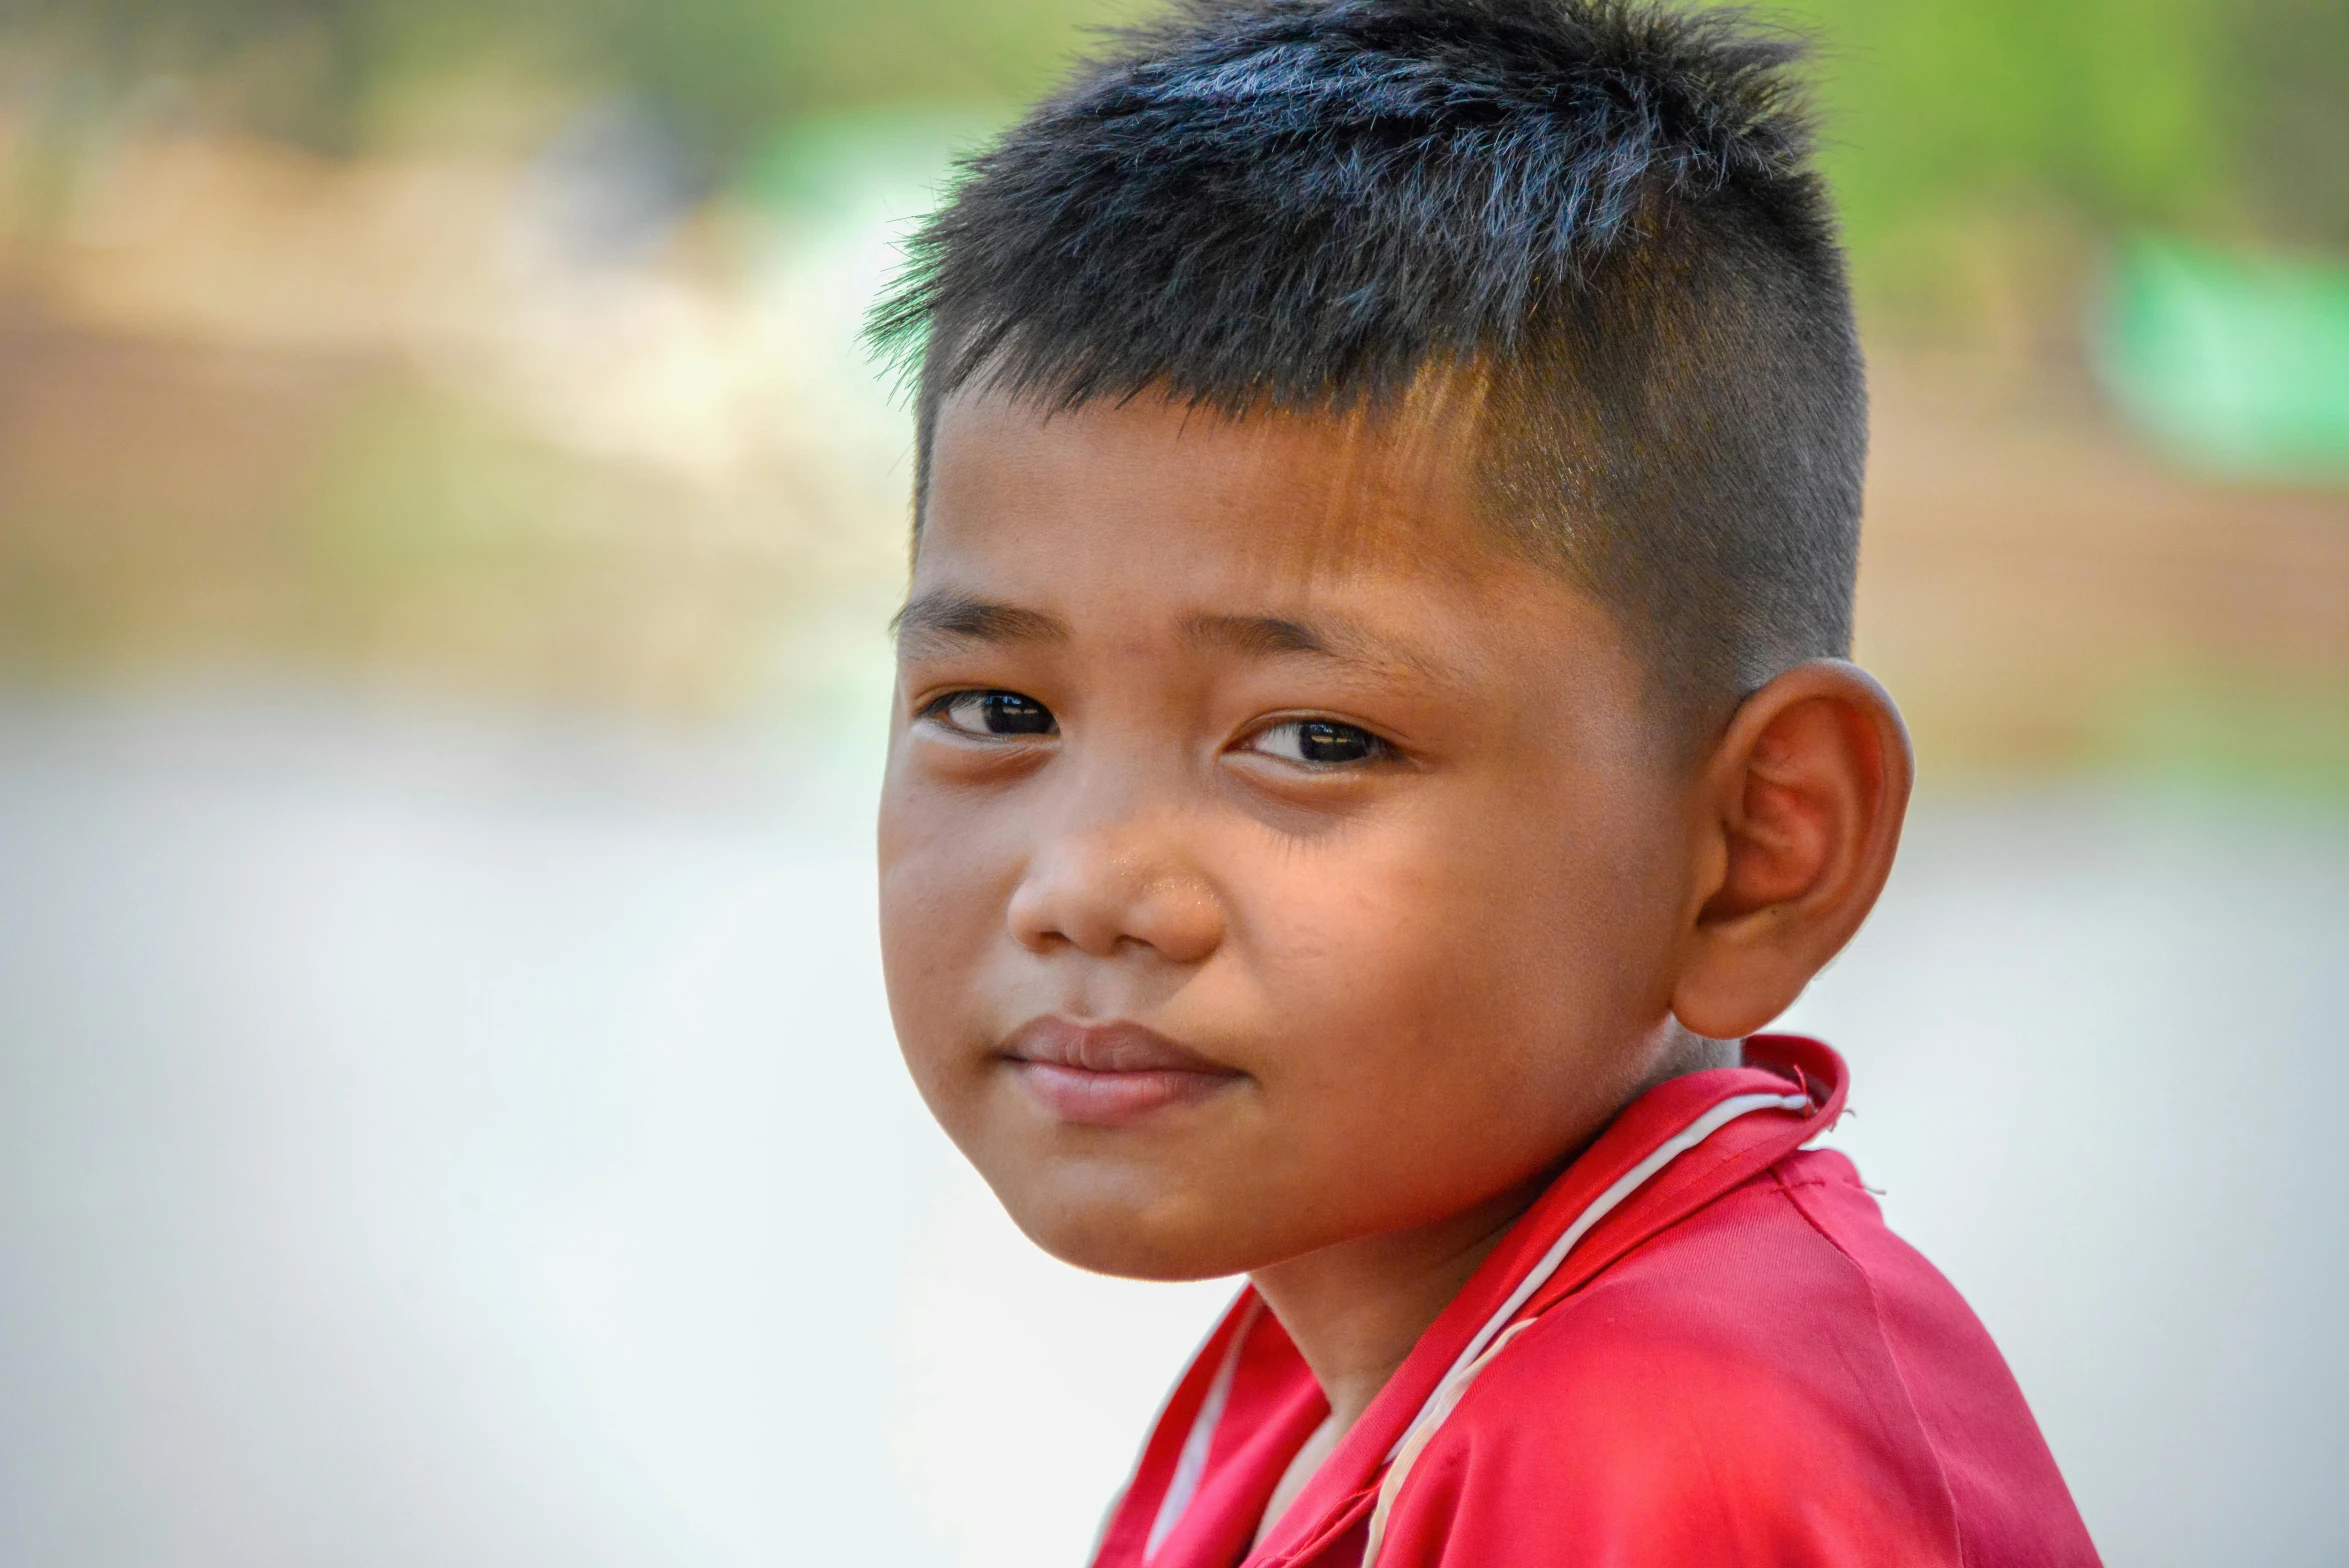 a child with a red shirt is smiling at the camera